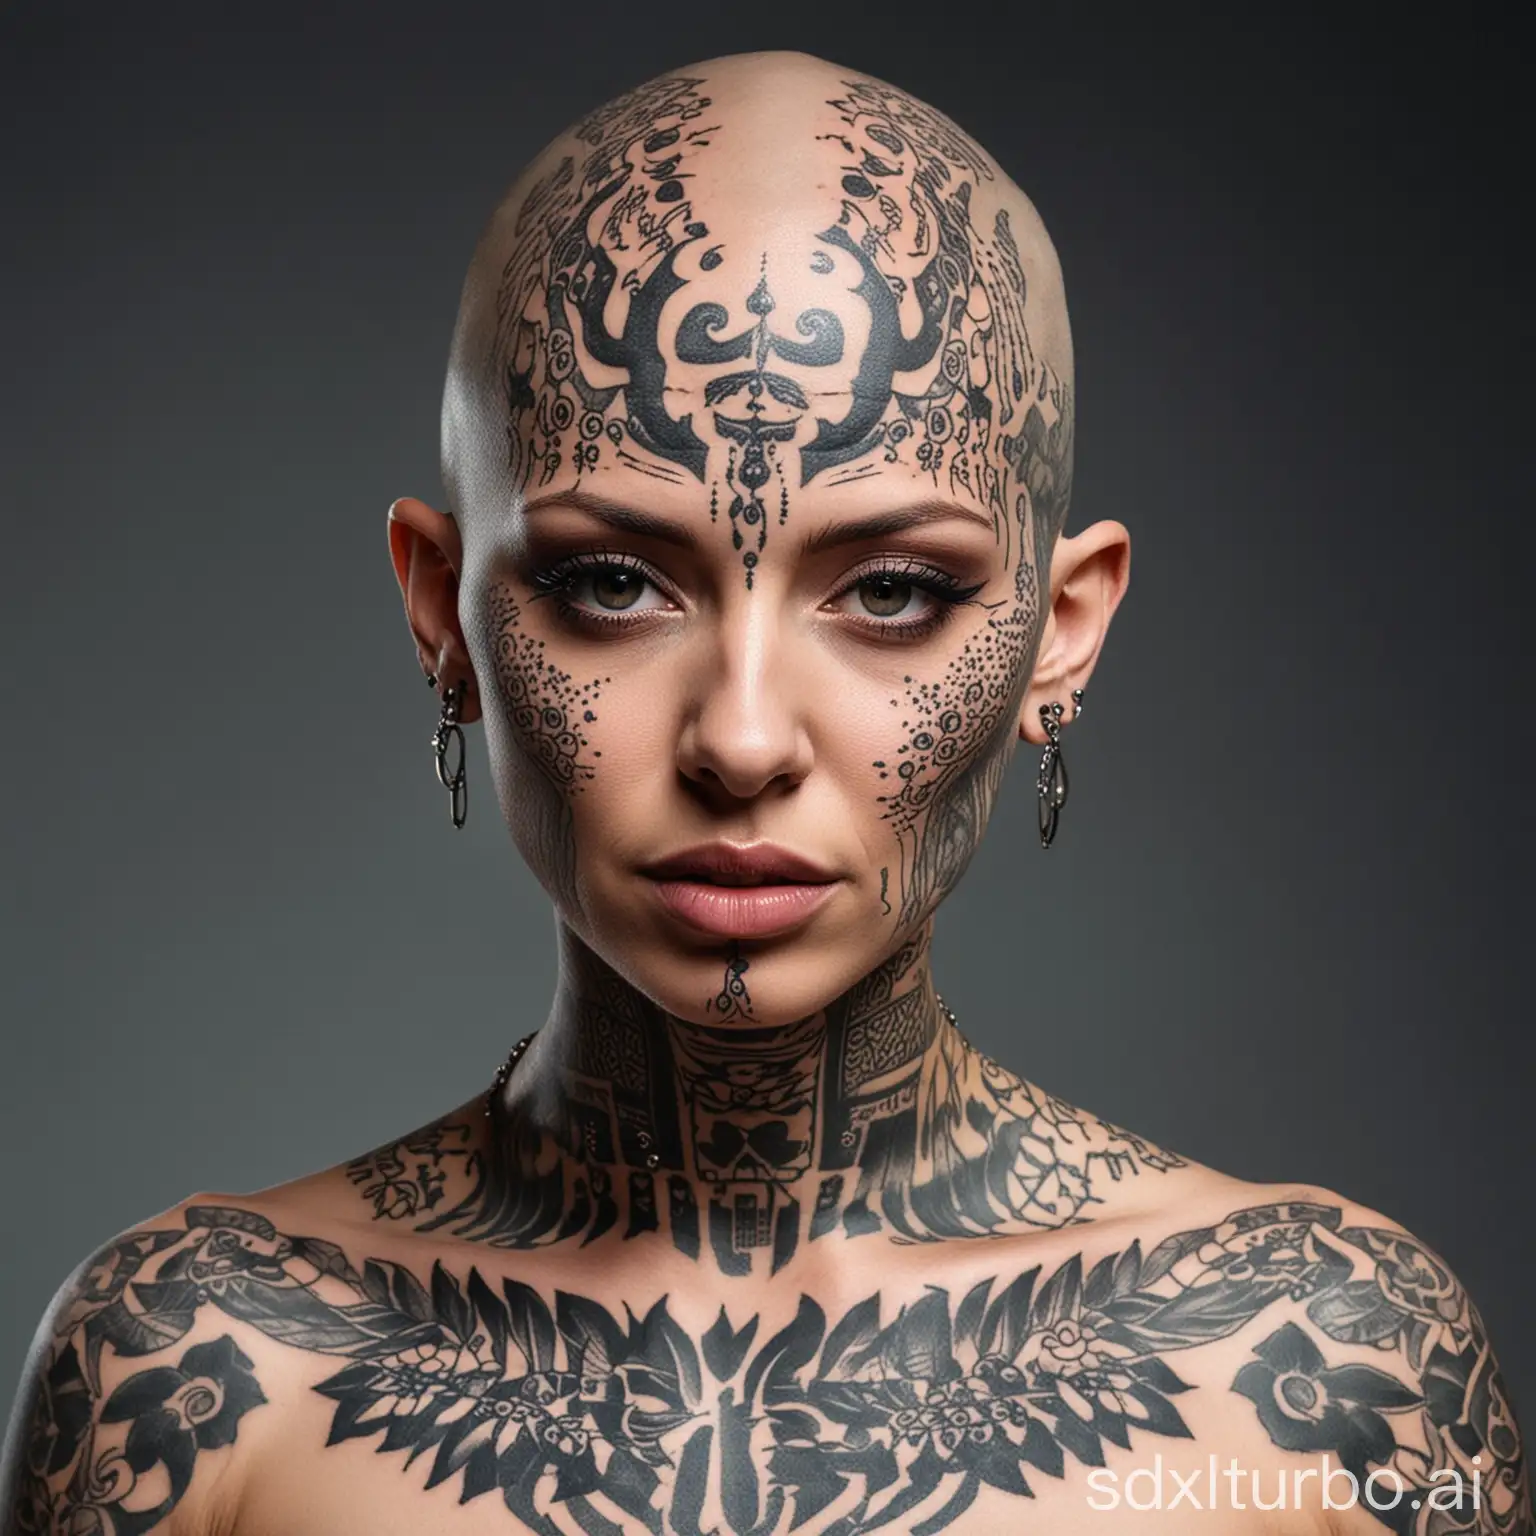 bald Head woman with excessive tattos on her whole head and extreme many piercings in face